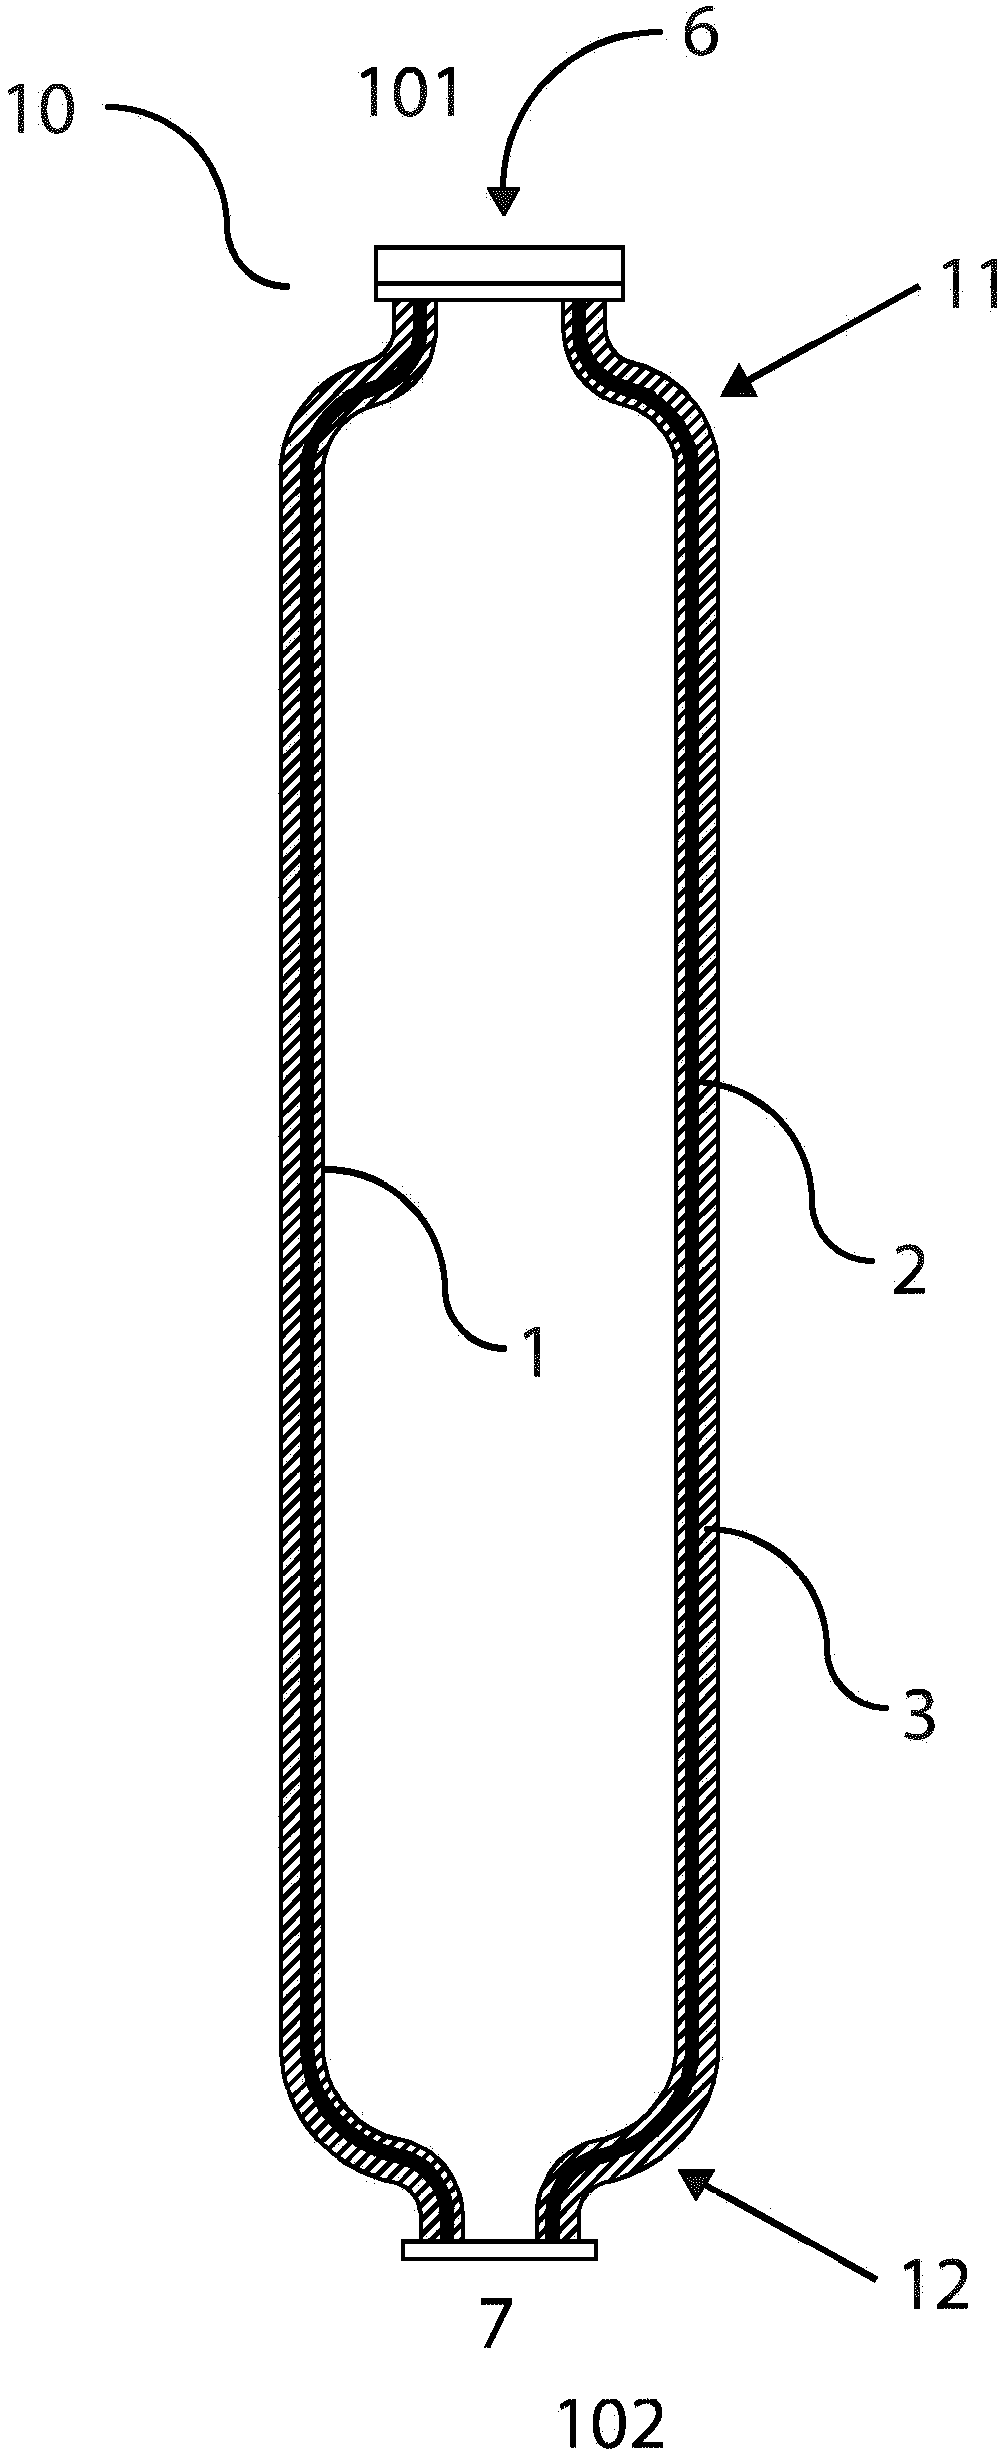 Pressure vessel with metallic liner and two fiber layers of different material